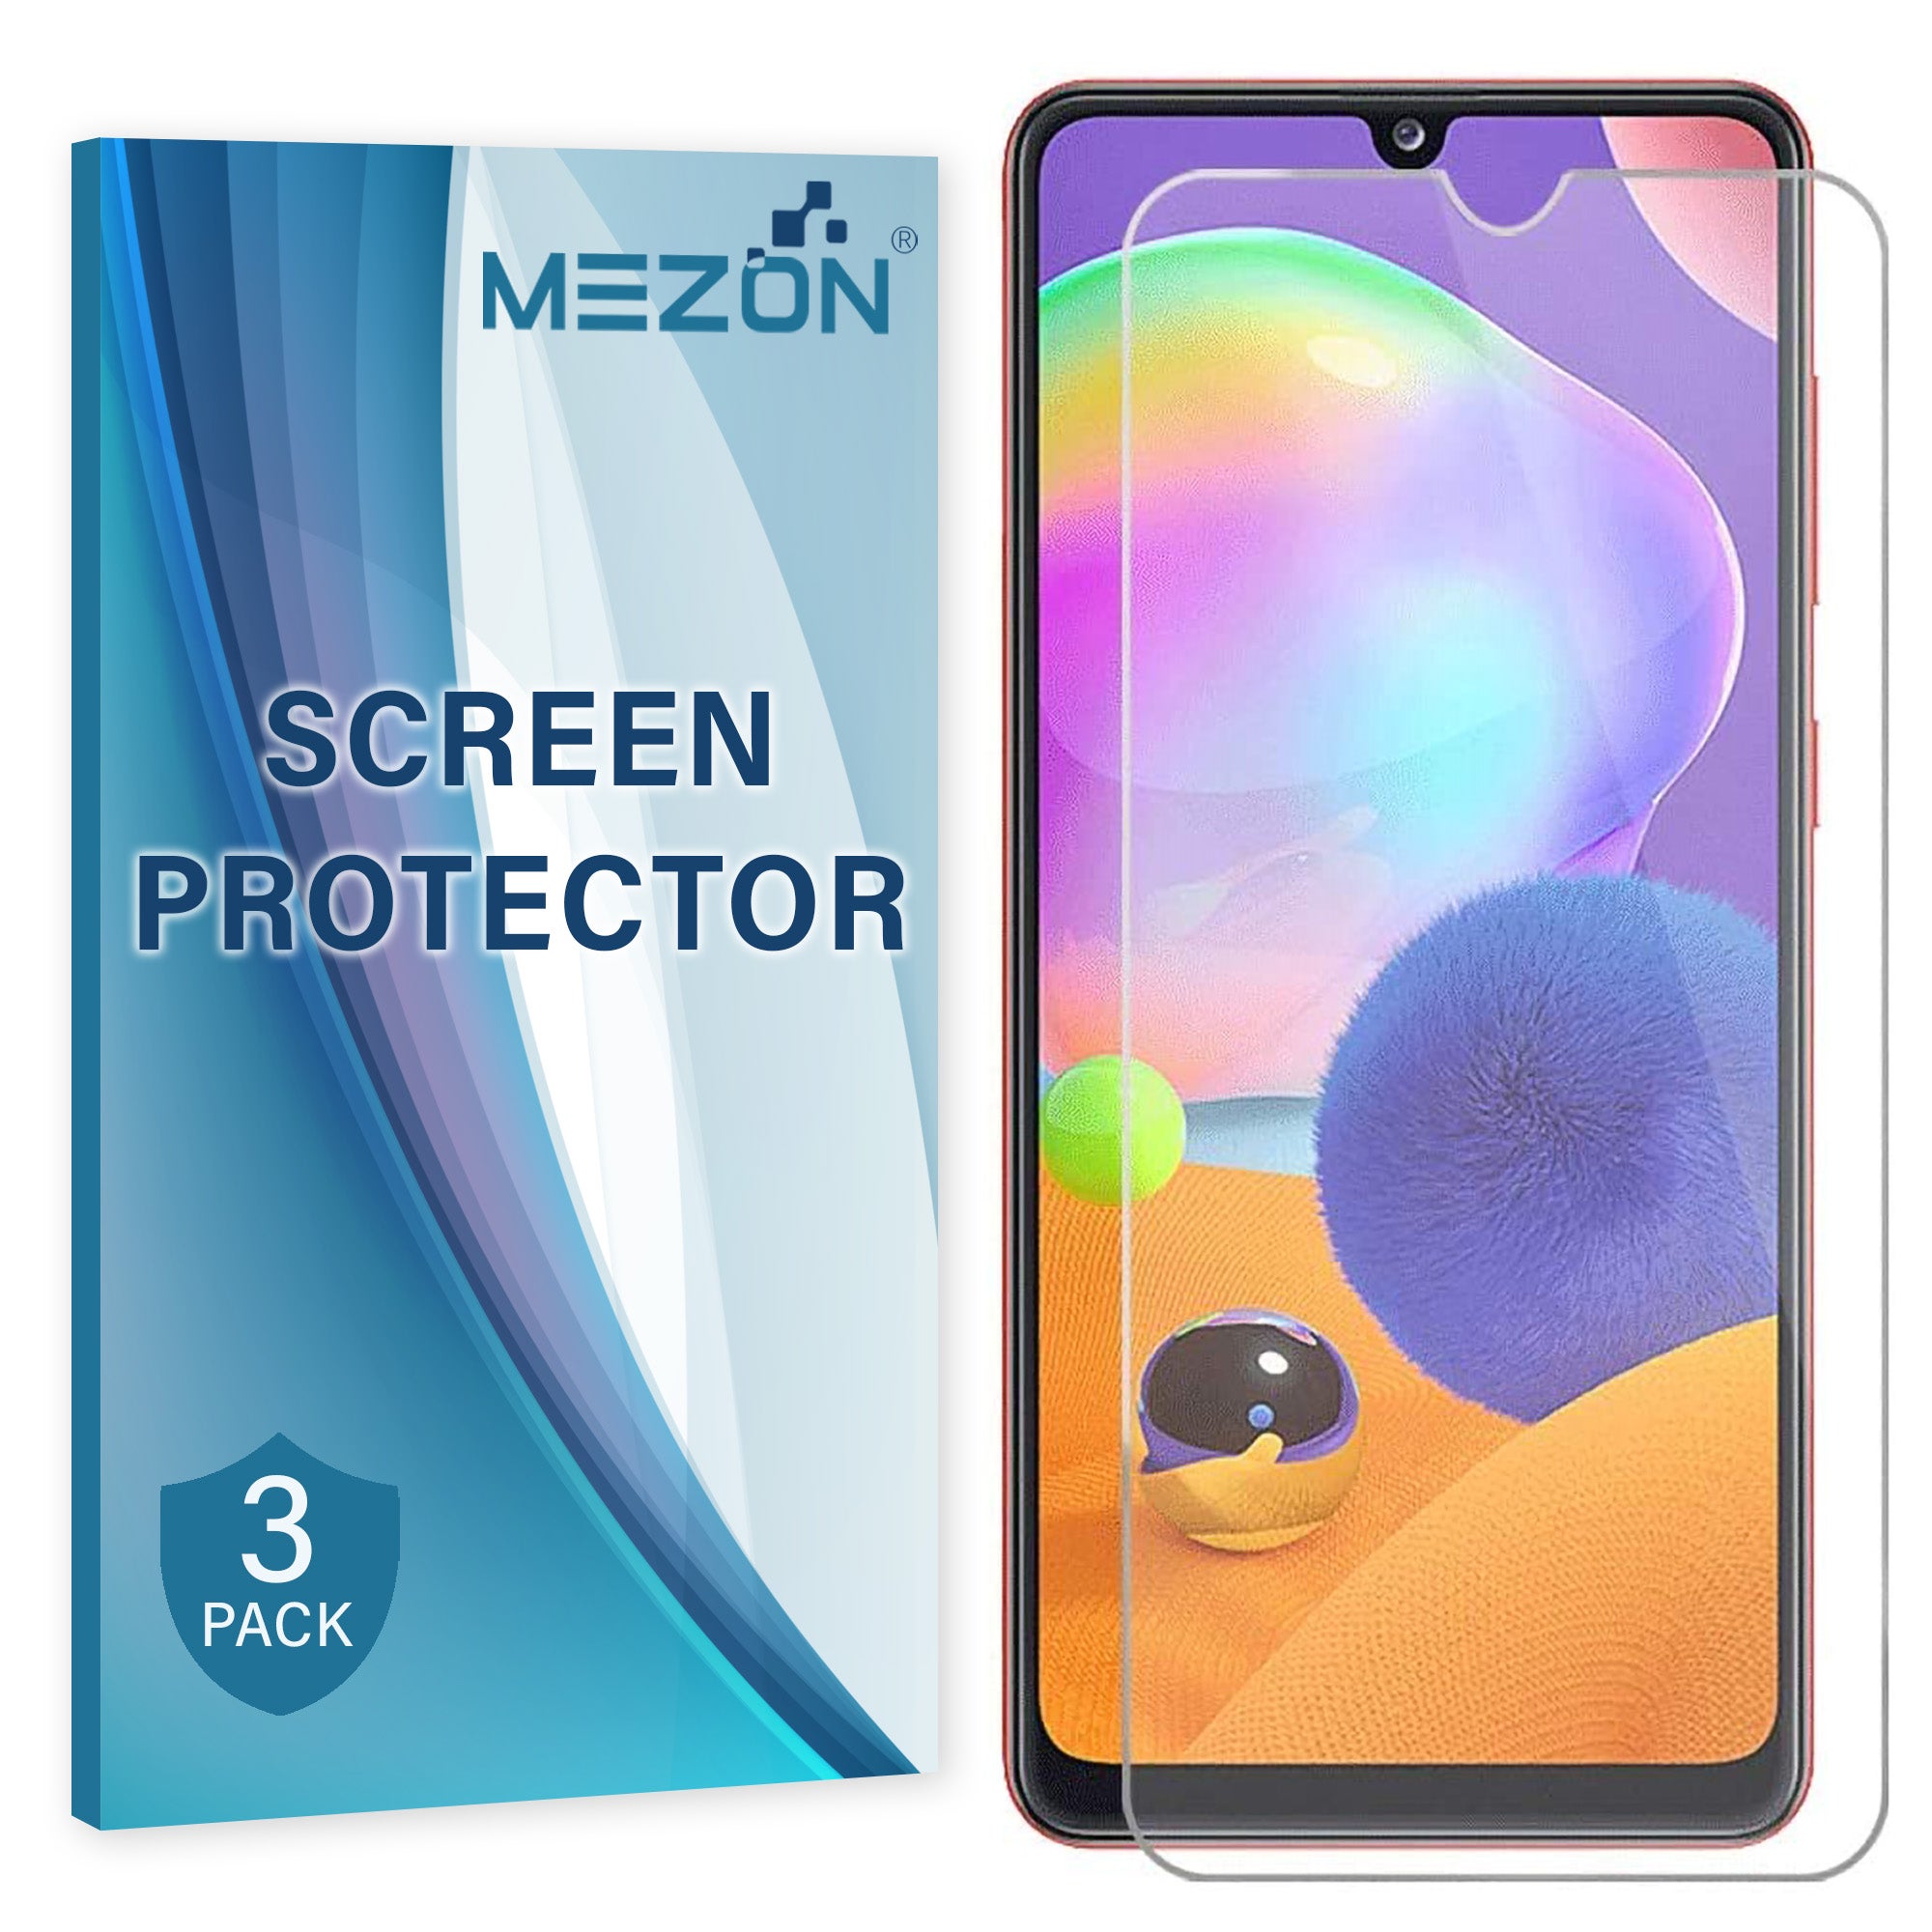 [3 Pack] Samsung Galaxy A31 Ultra Clear Screen Protector Film by MEZON – Case Friendly, Shock Absorption (A31, Clear)